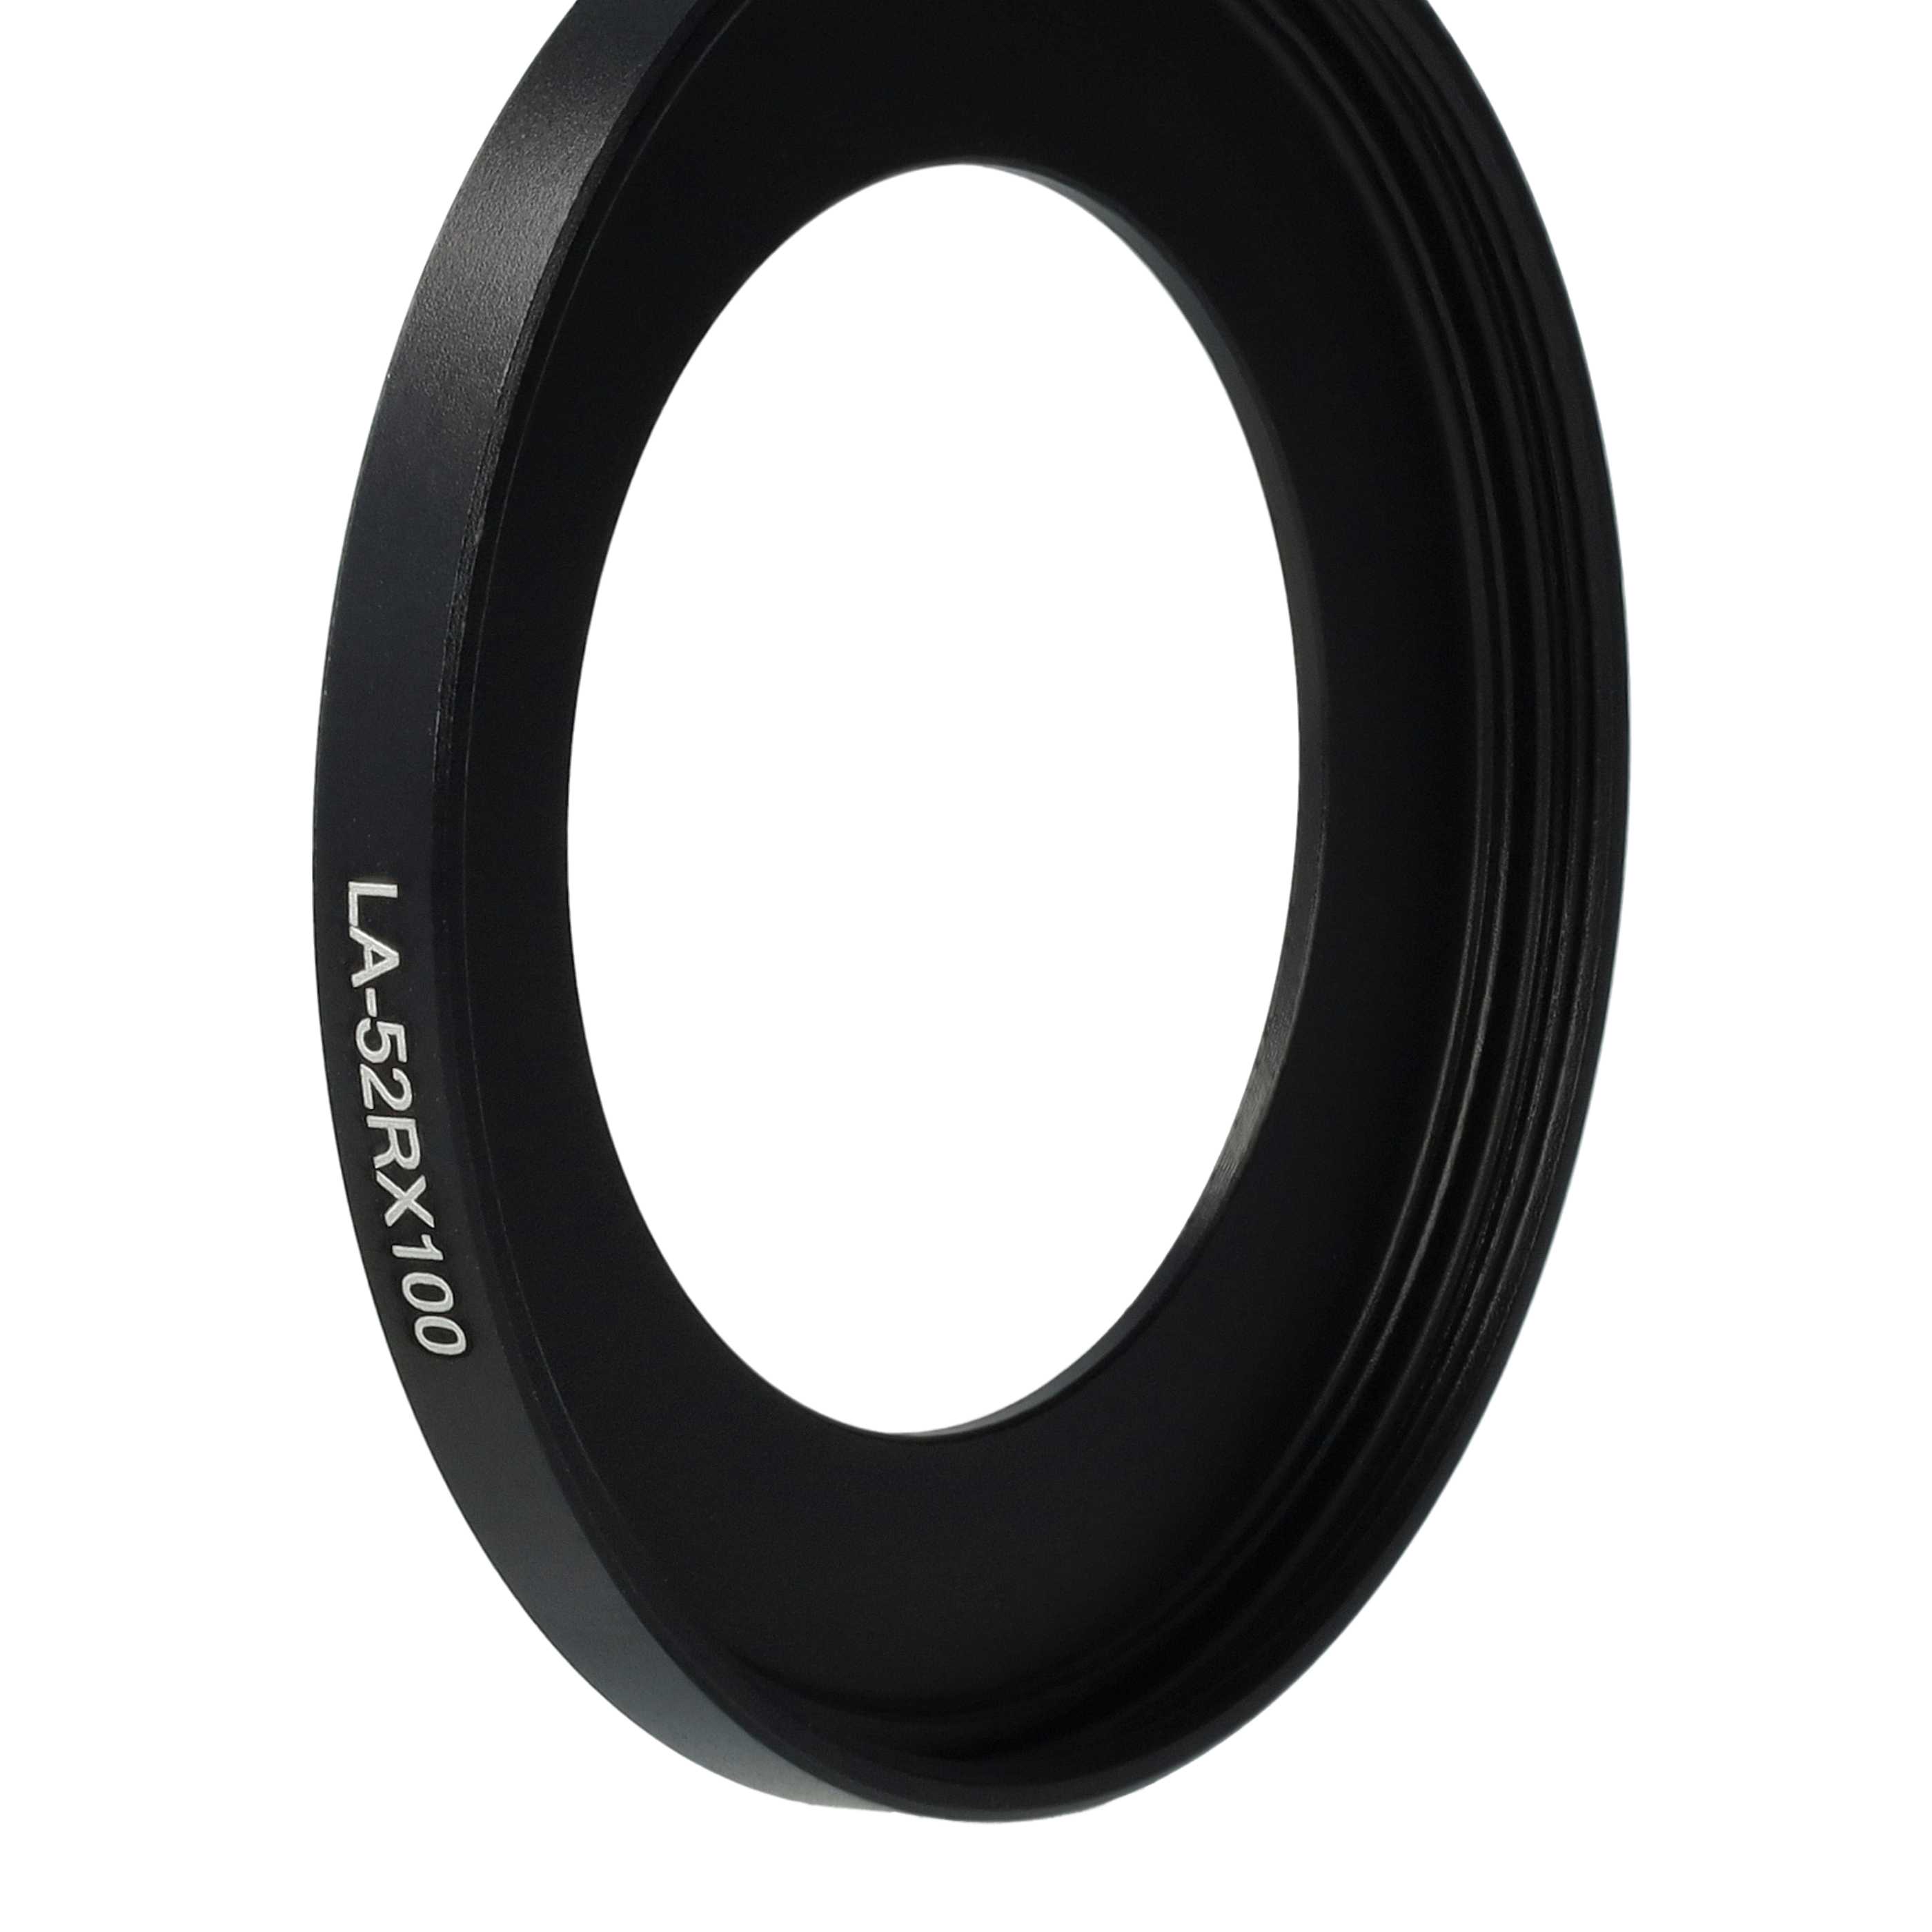 52 mm Filter Adapter replaces Sony LA-52RX100 for Camera Lens